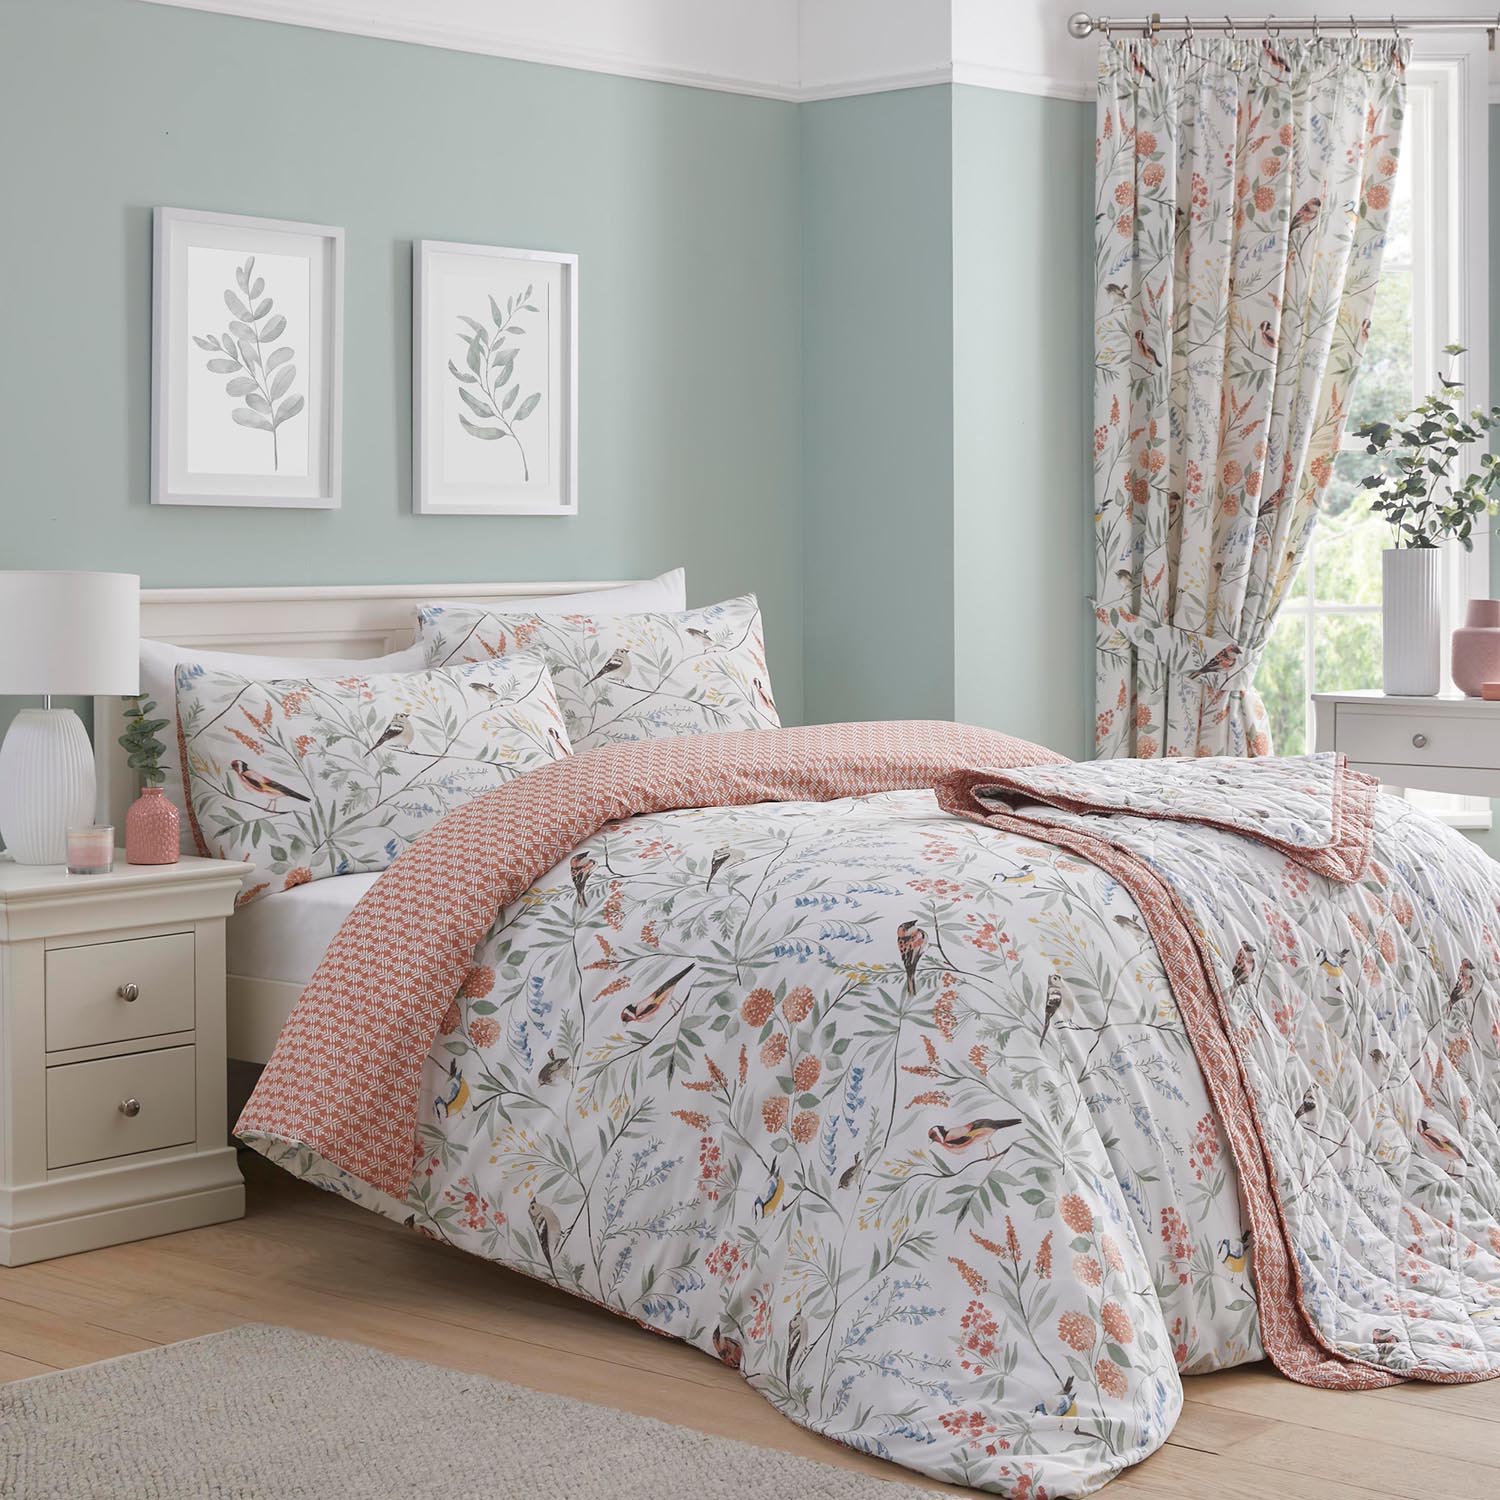 The Home Collection Bird Floral Terracotta Bedspread 1 Shaws Department Stores